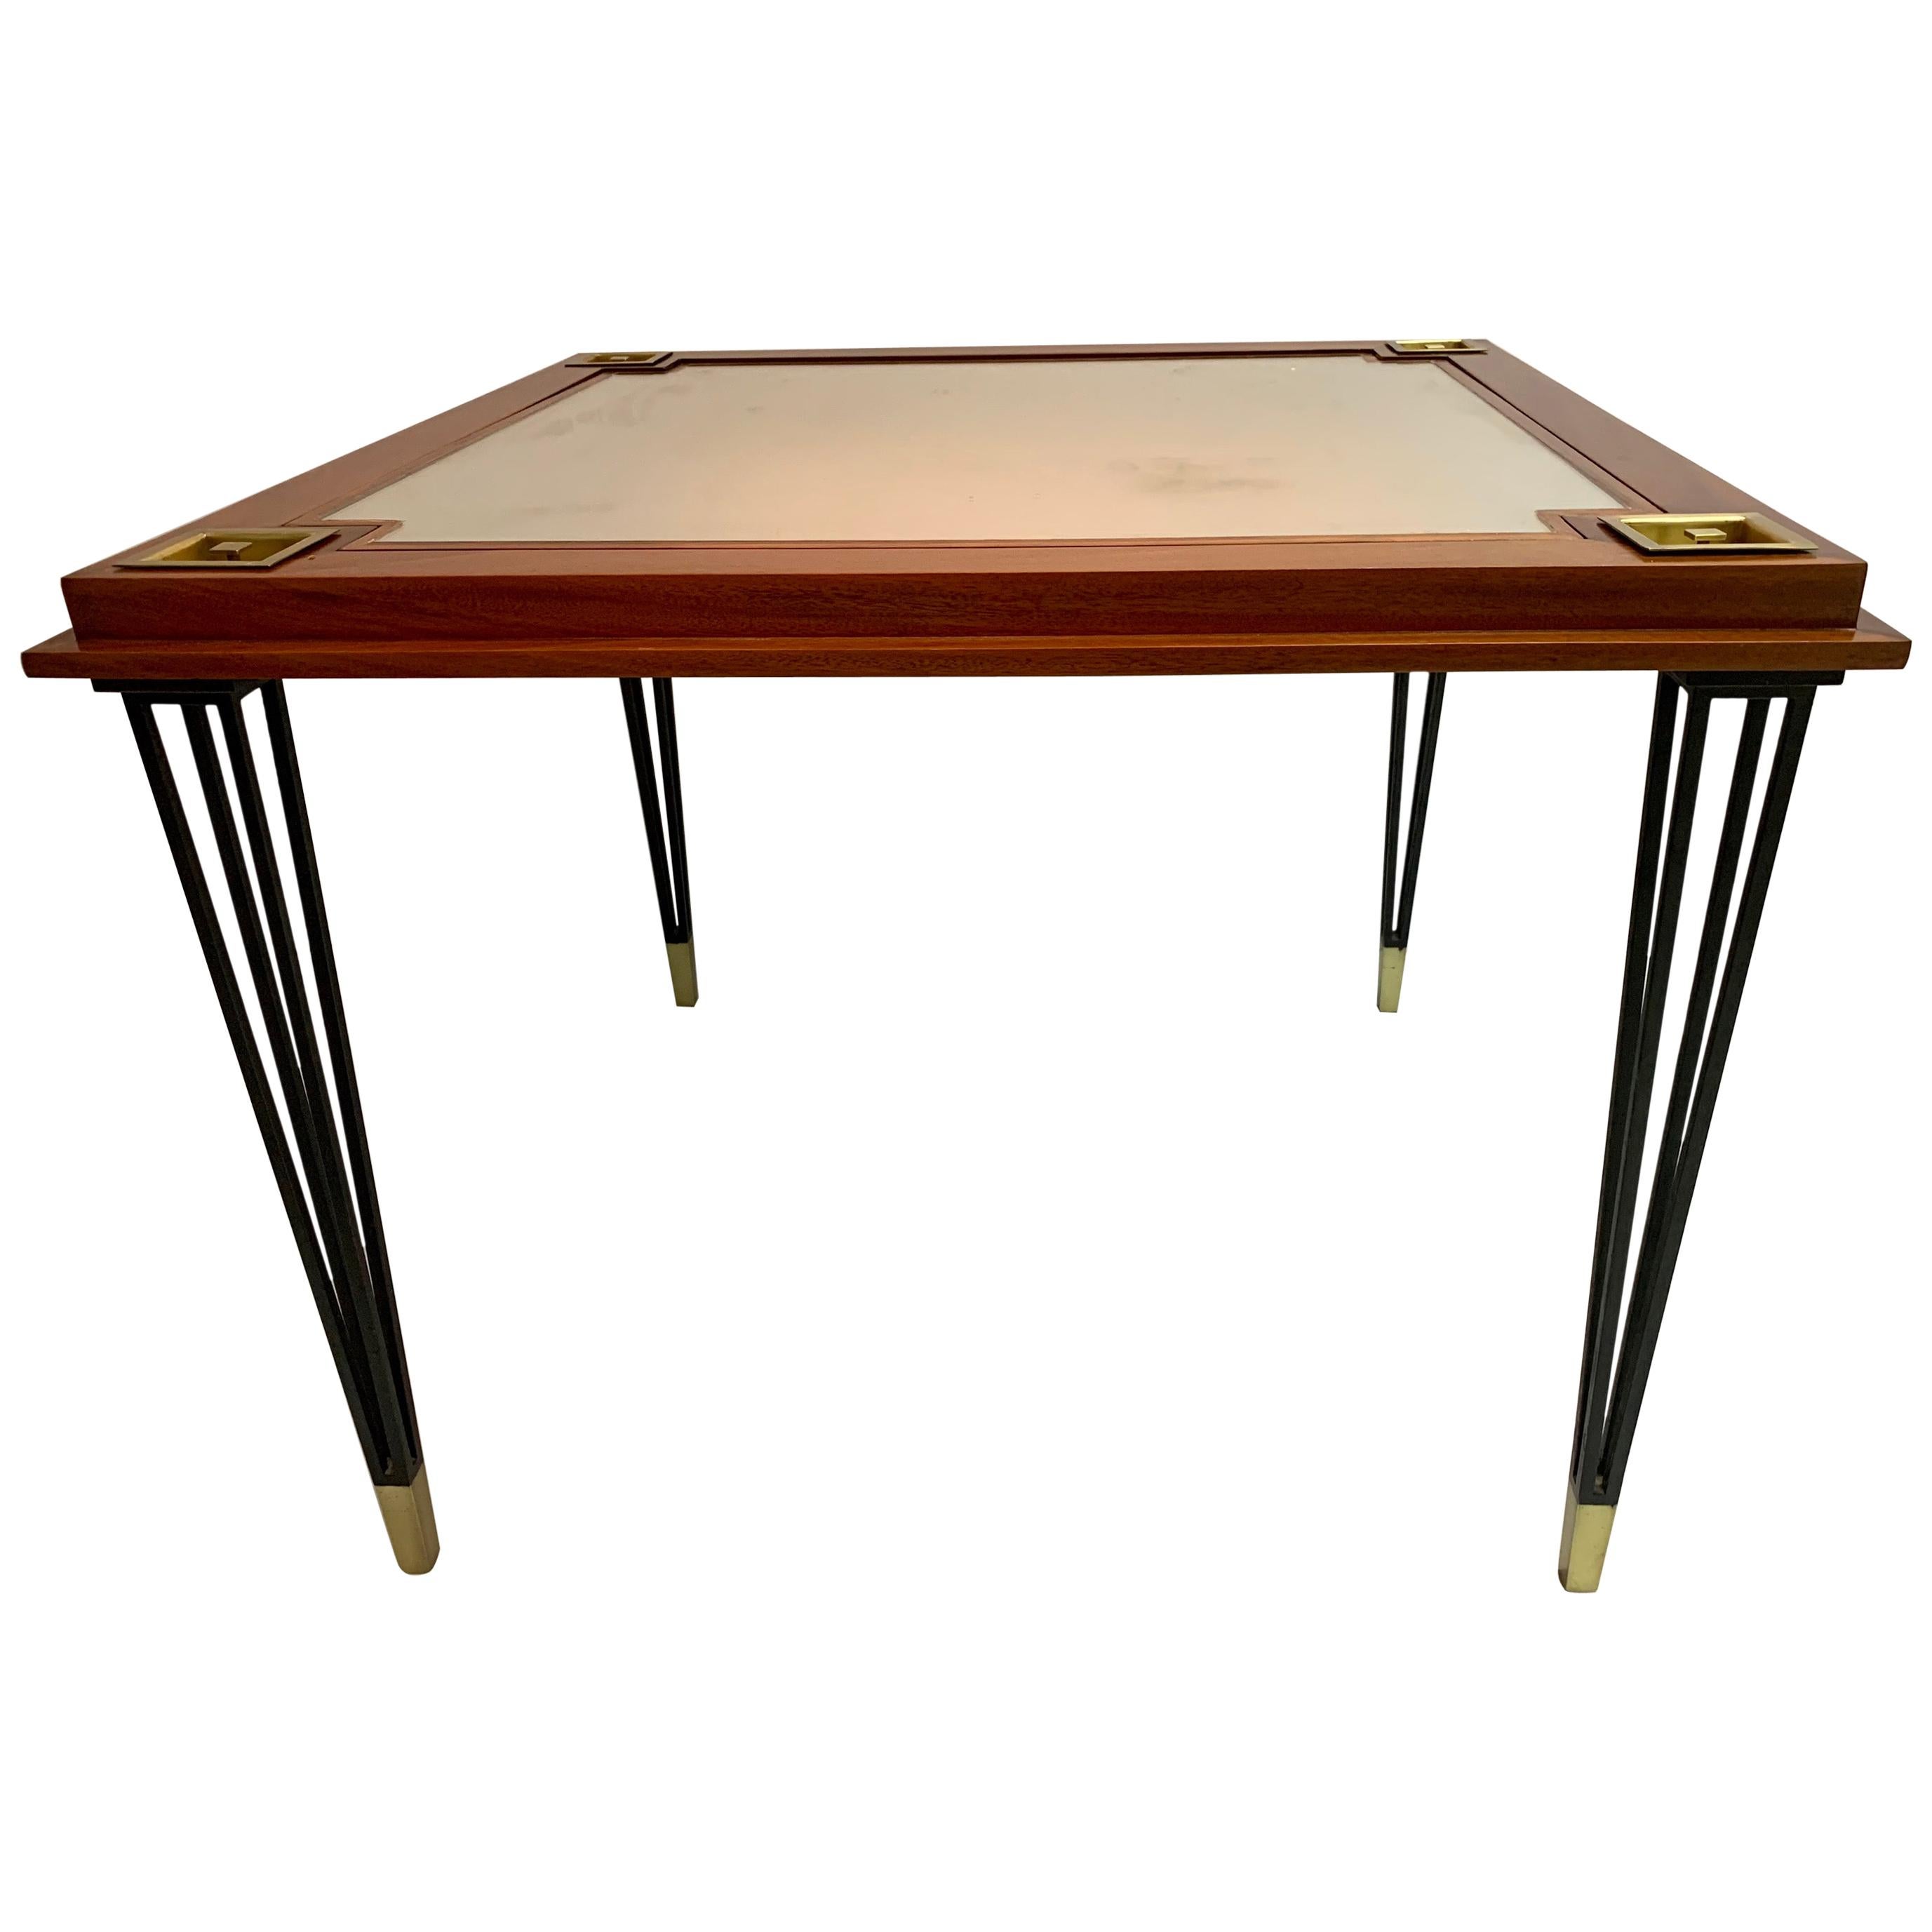 Customized Game Table by Roberto and Mito Block, México, 1953 For Sale